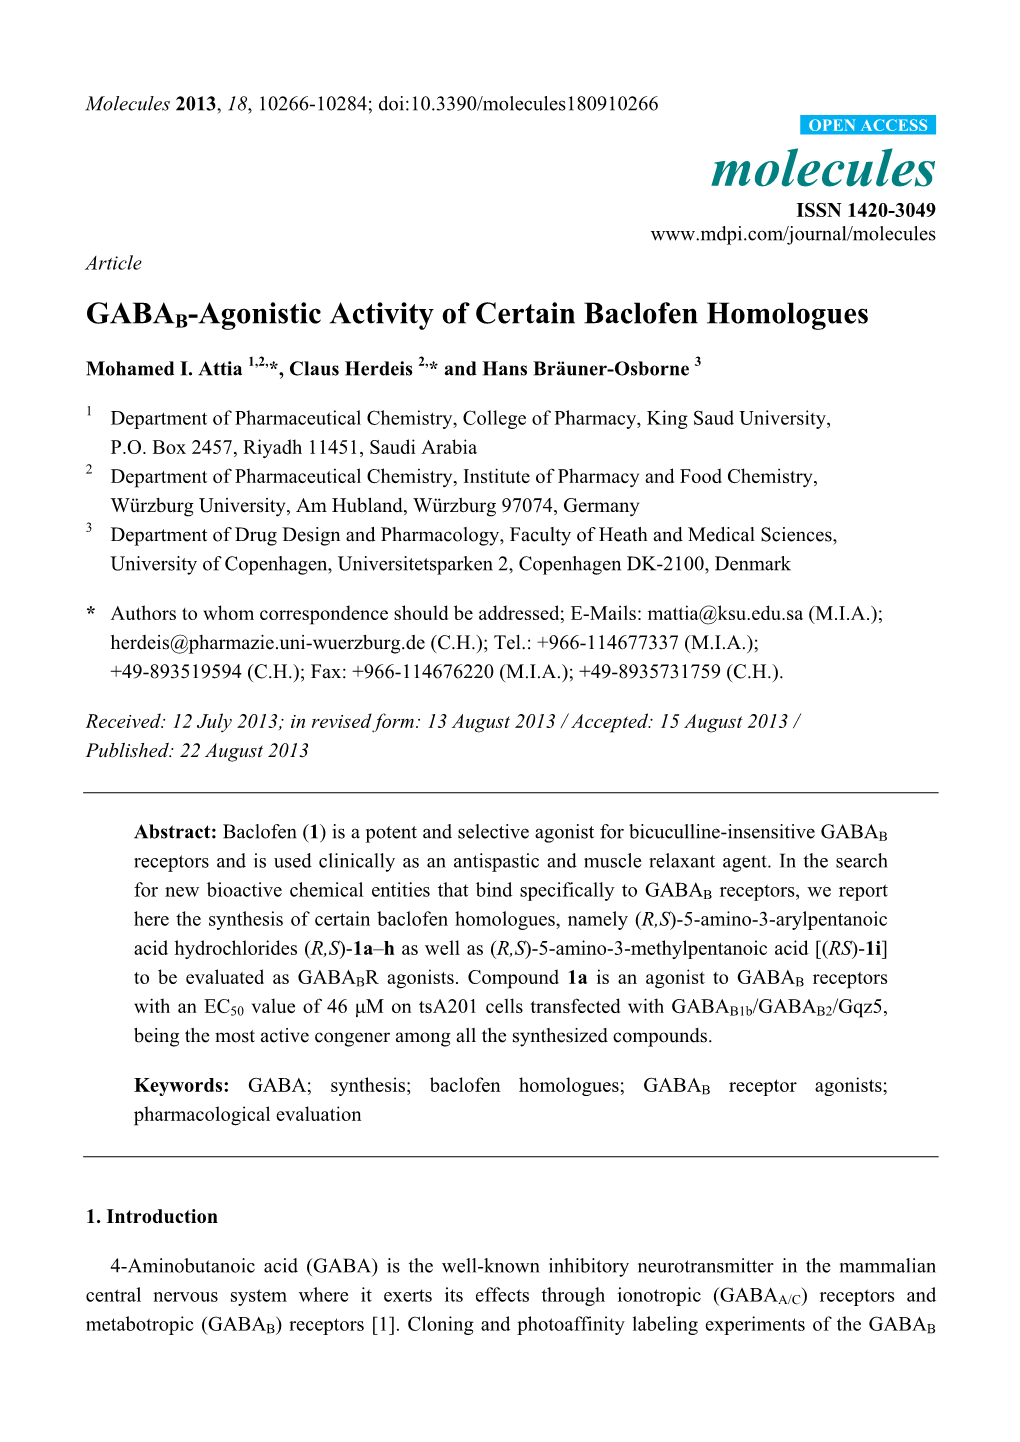 GABAB-Agonistic Activity of Certain Baclofen Homologues